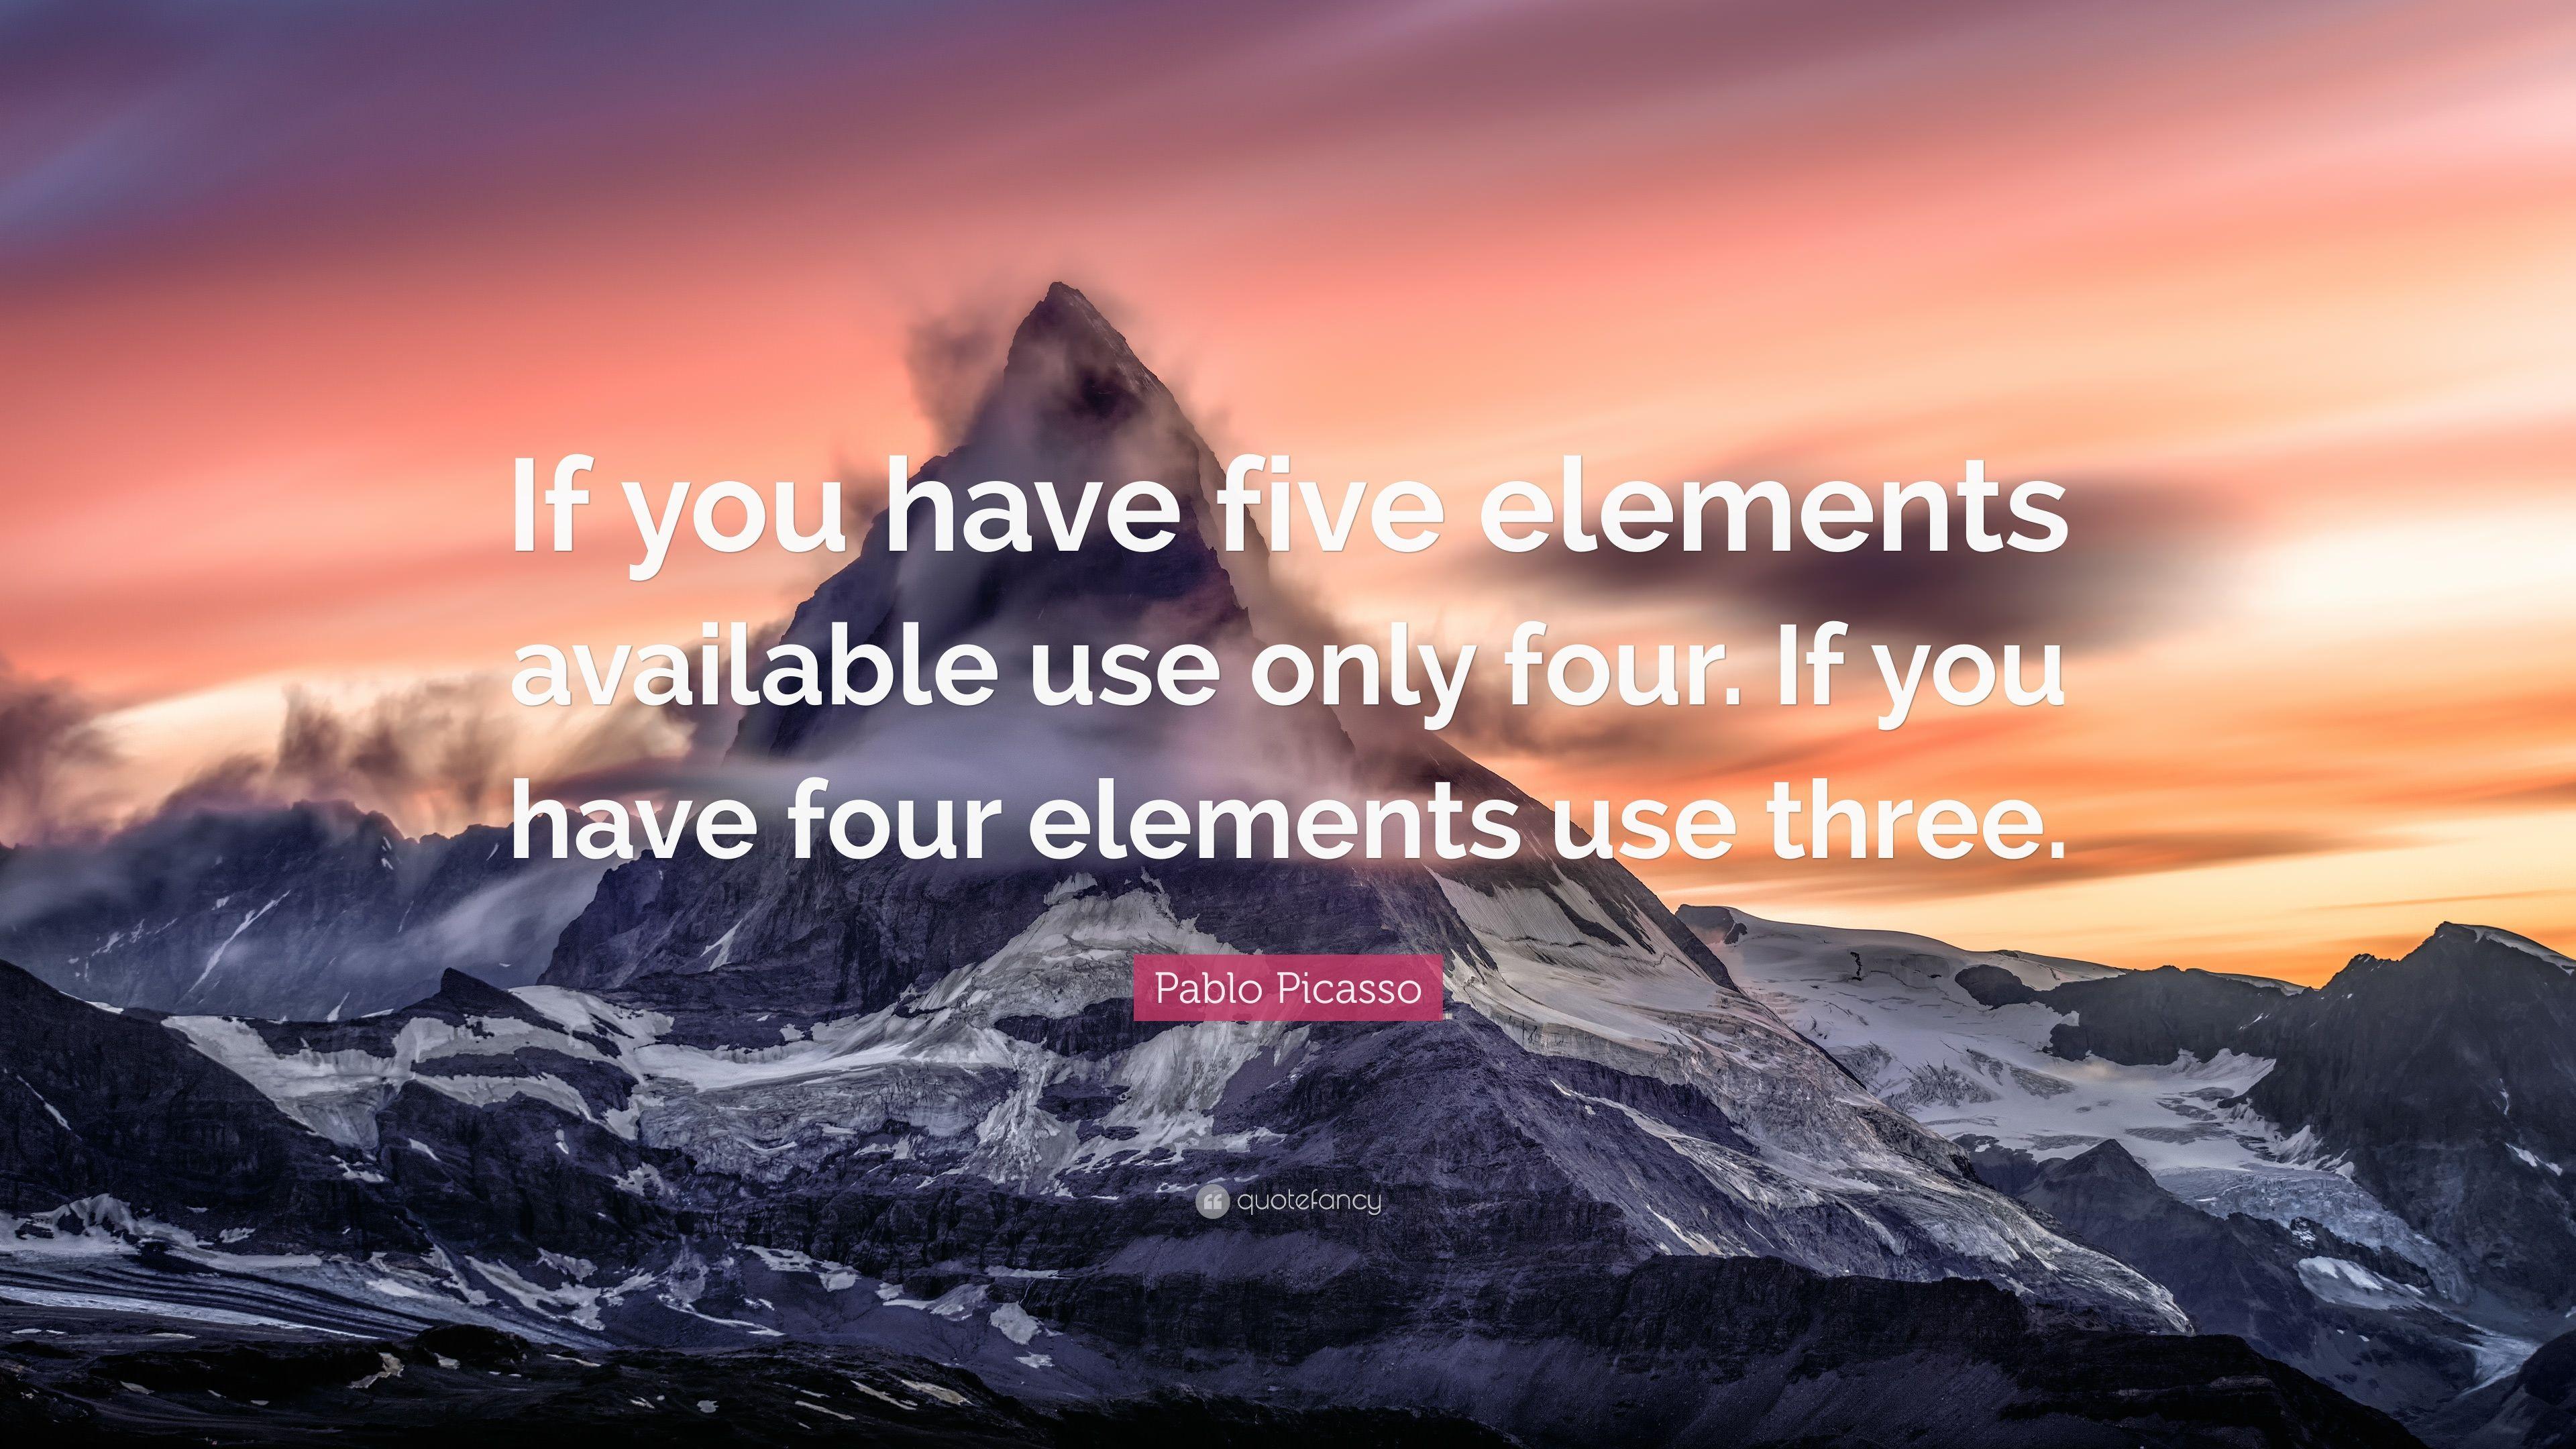 Pablo Picasso Quote: “If you have five elements available use only